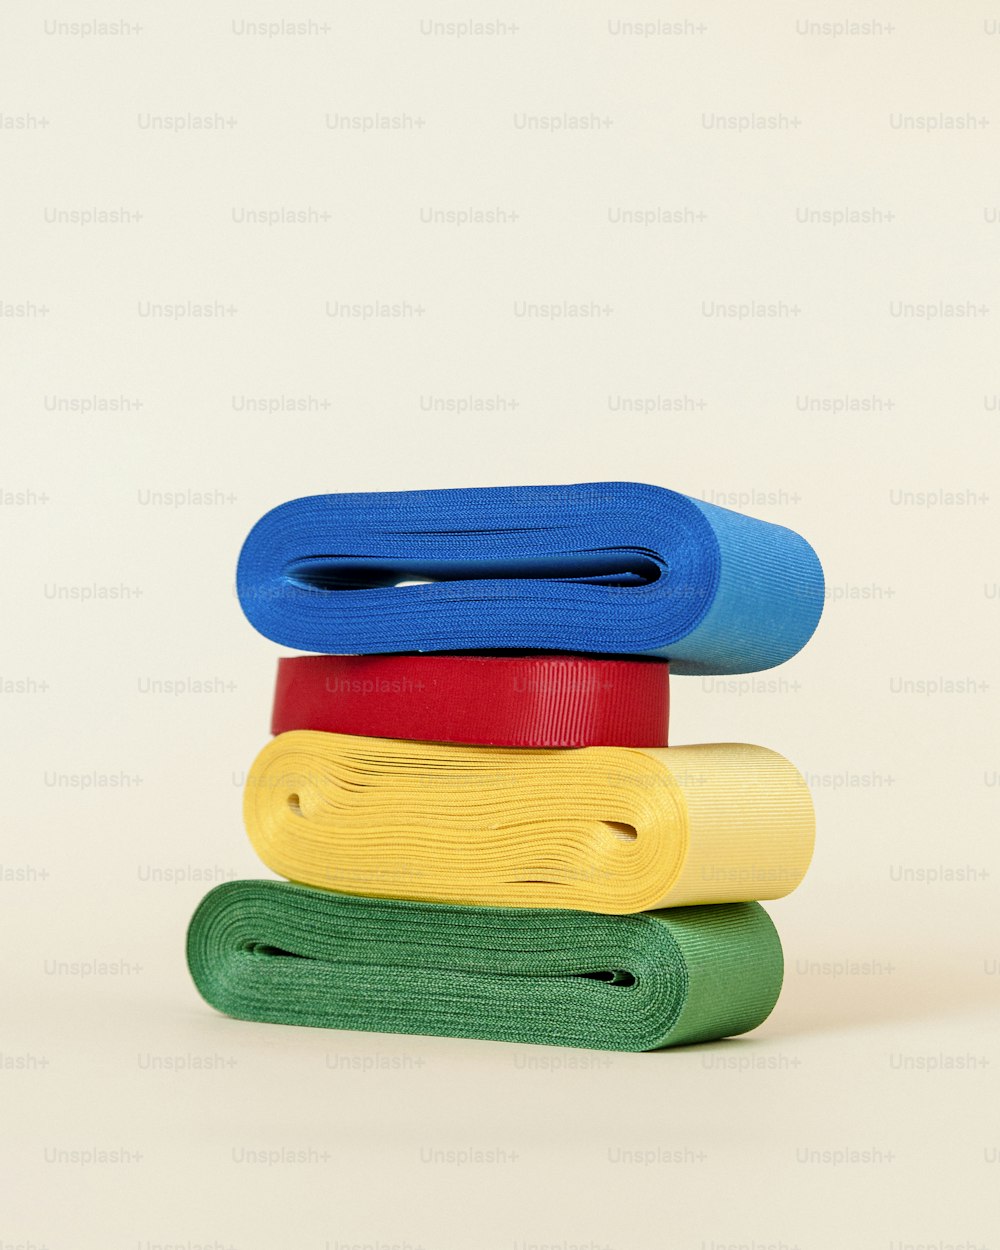 a stack of colorful yoga mats stacked on top of each other